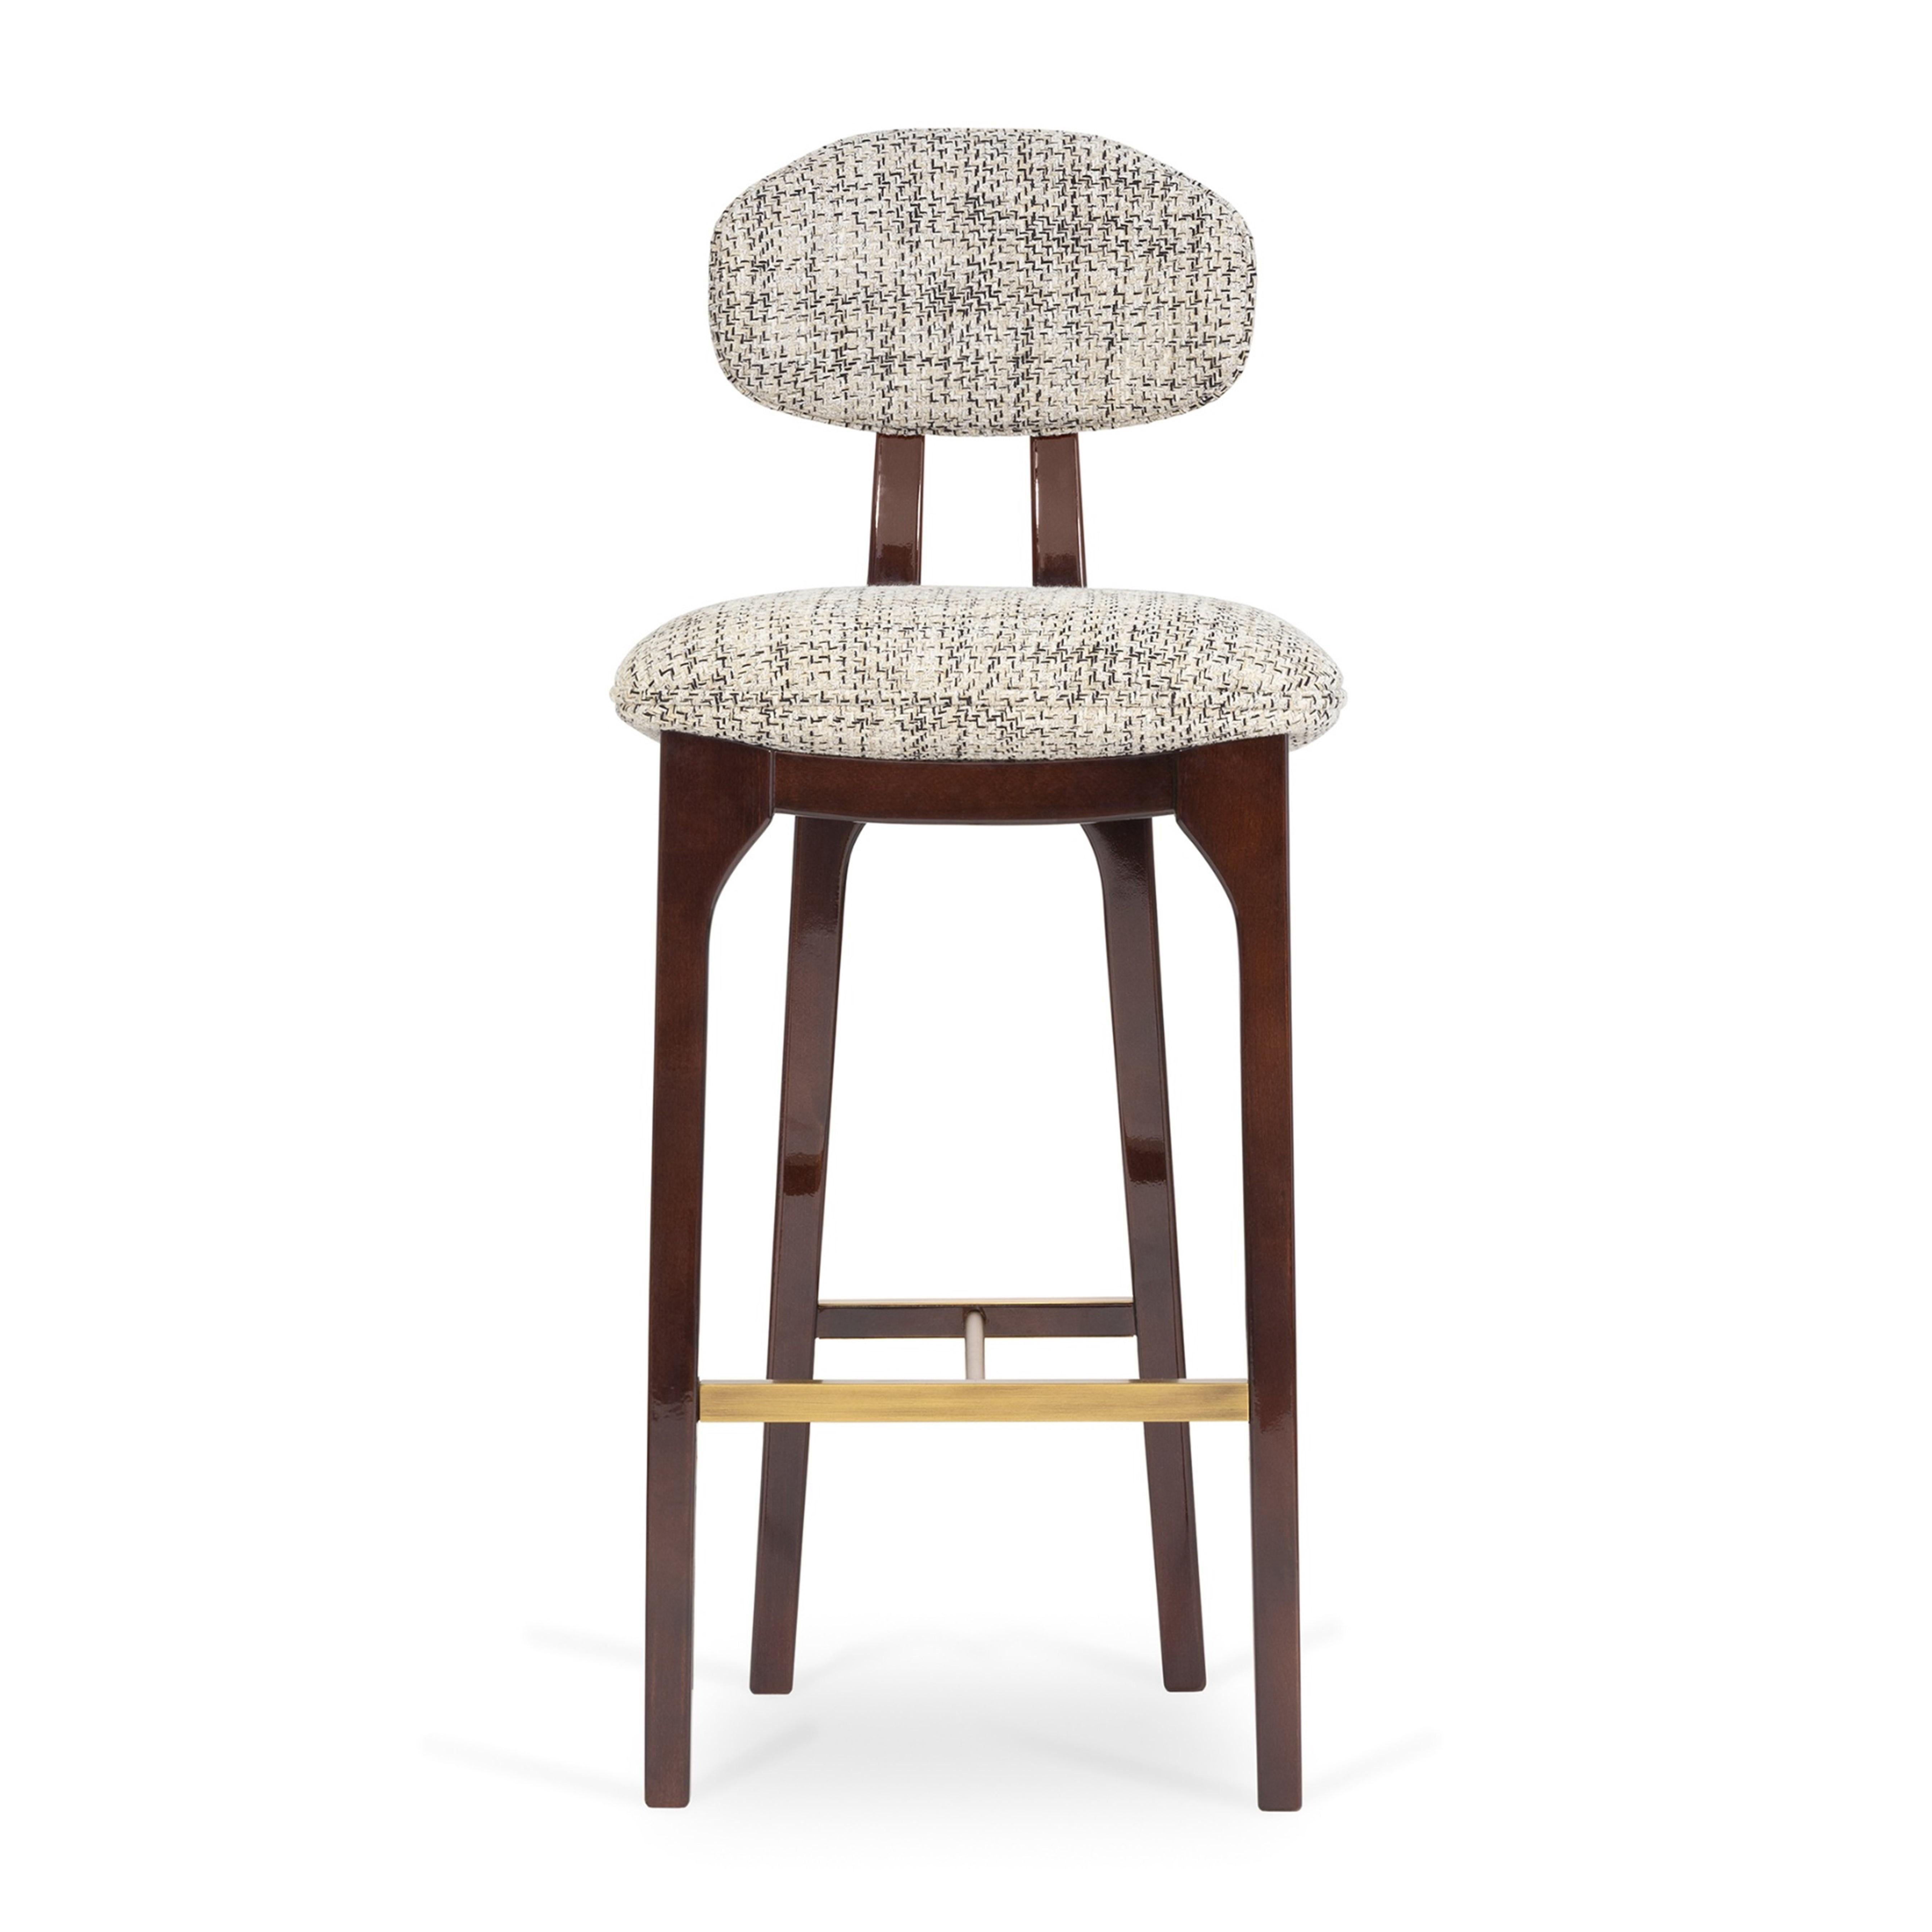 Silhouette is a surreal reminiscence of a woman’s sensual curves that arise designed in an eye catching bar stool.

The joint dimension of people and objects strongly influenced the Silhouette bar stool, whose elegant wooden structure uncovers parts